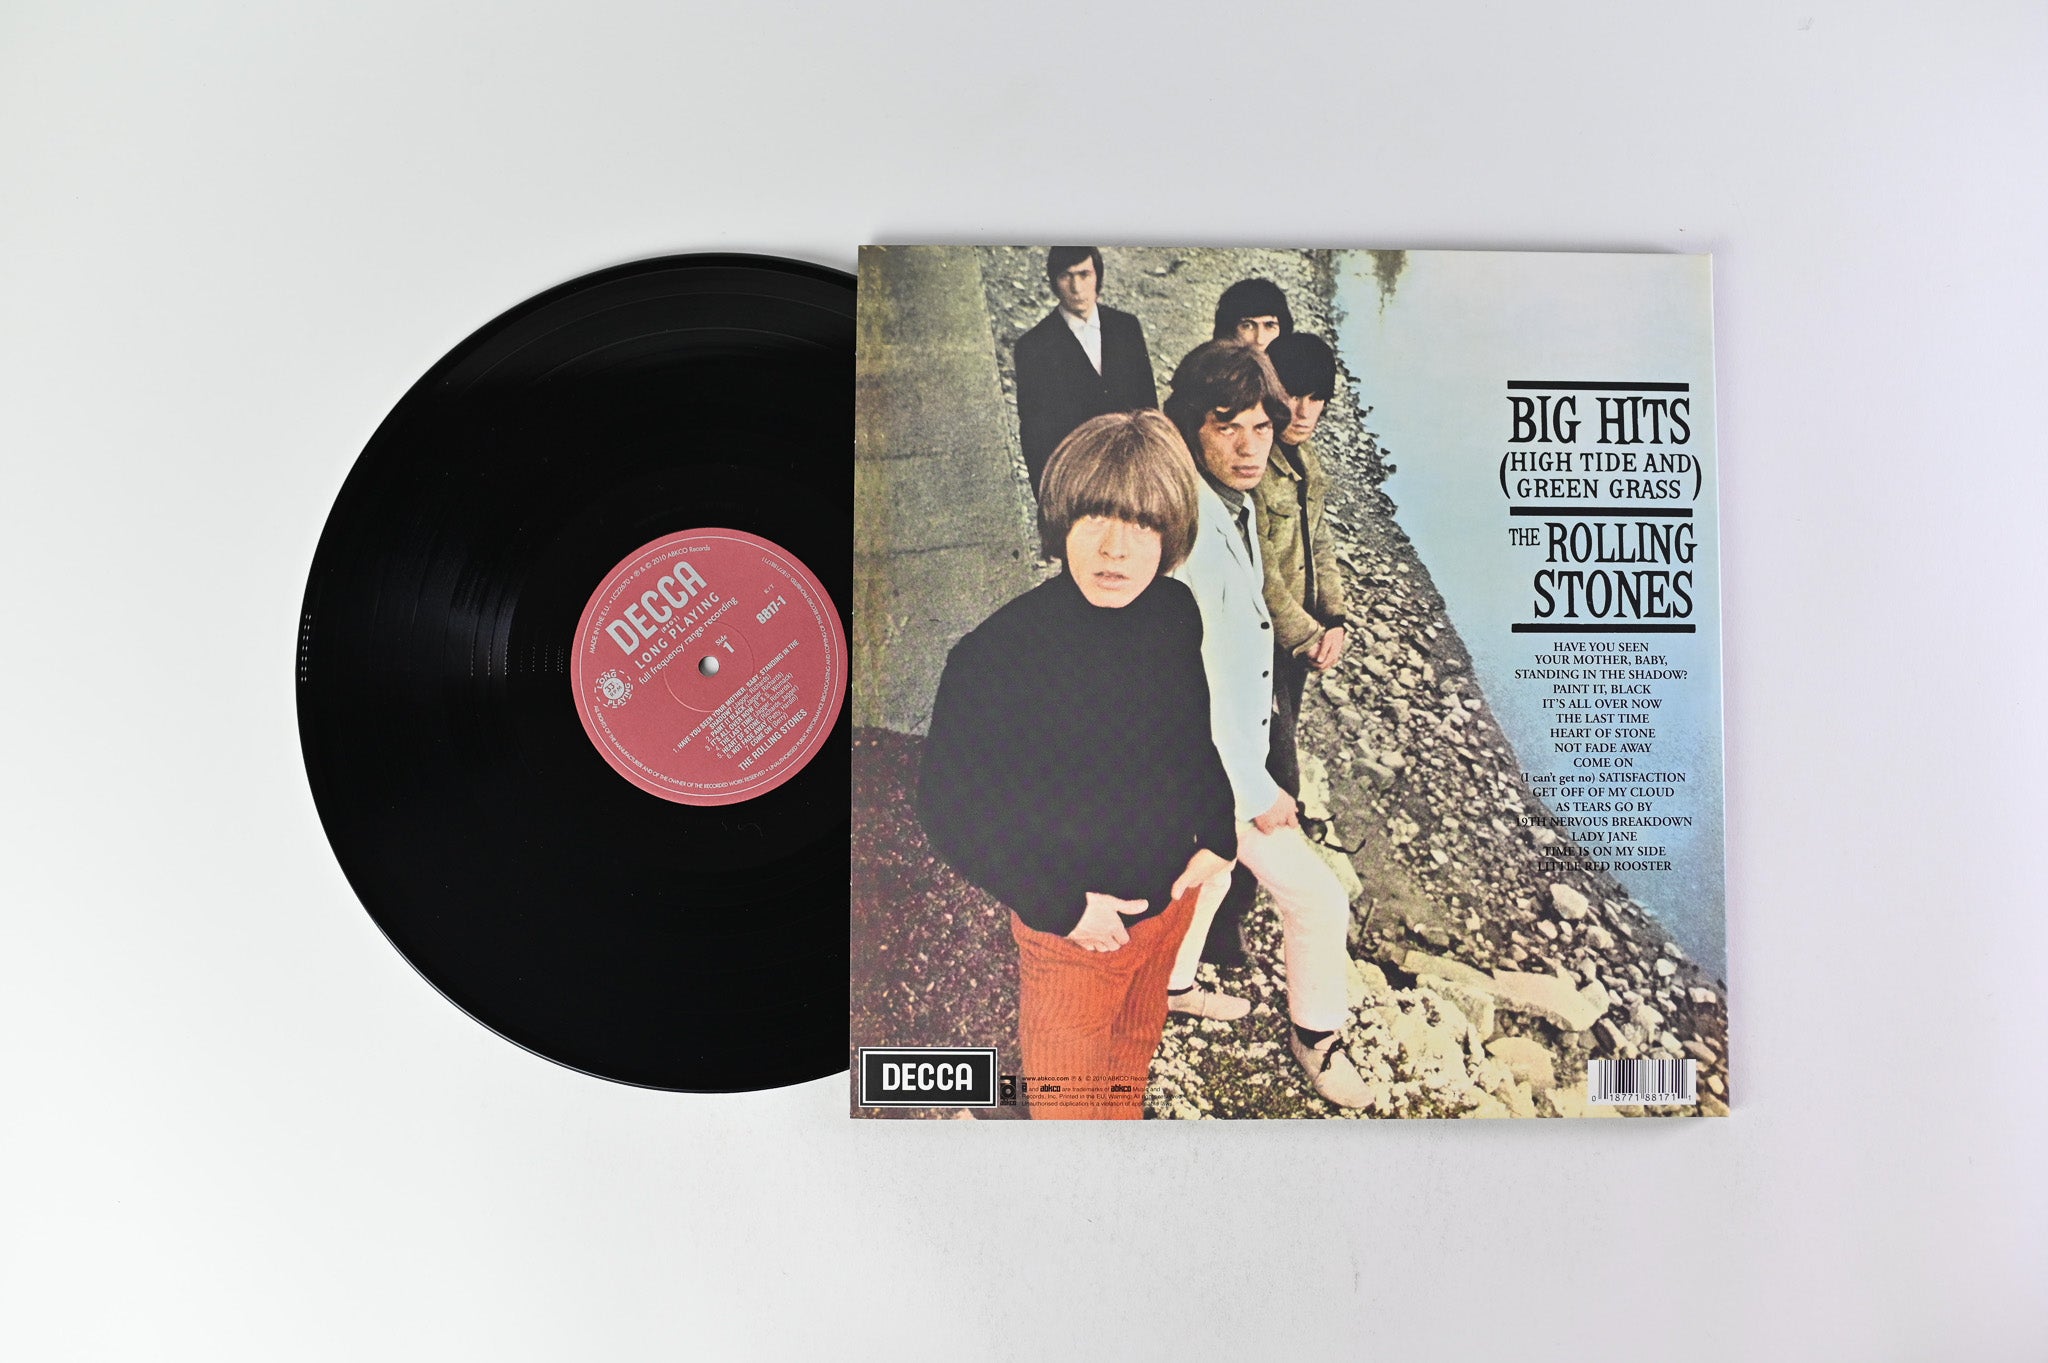 The Rolling Stones - Big Hits (High Tide And Green Grass) on ABKCO - Mono